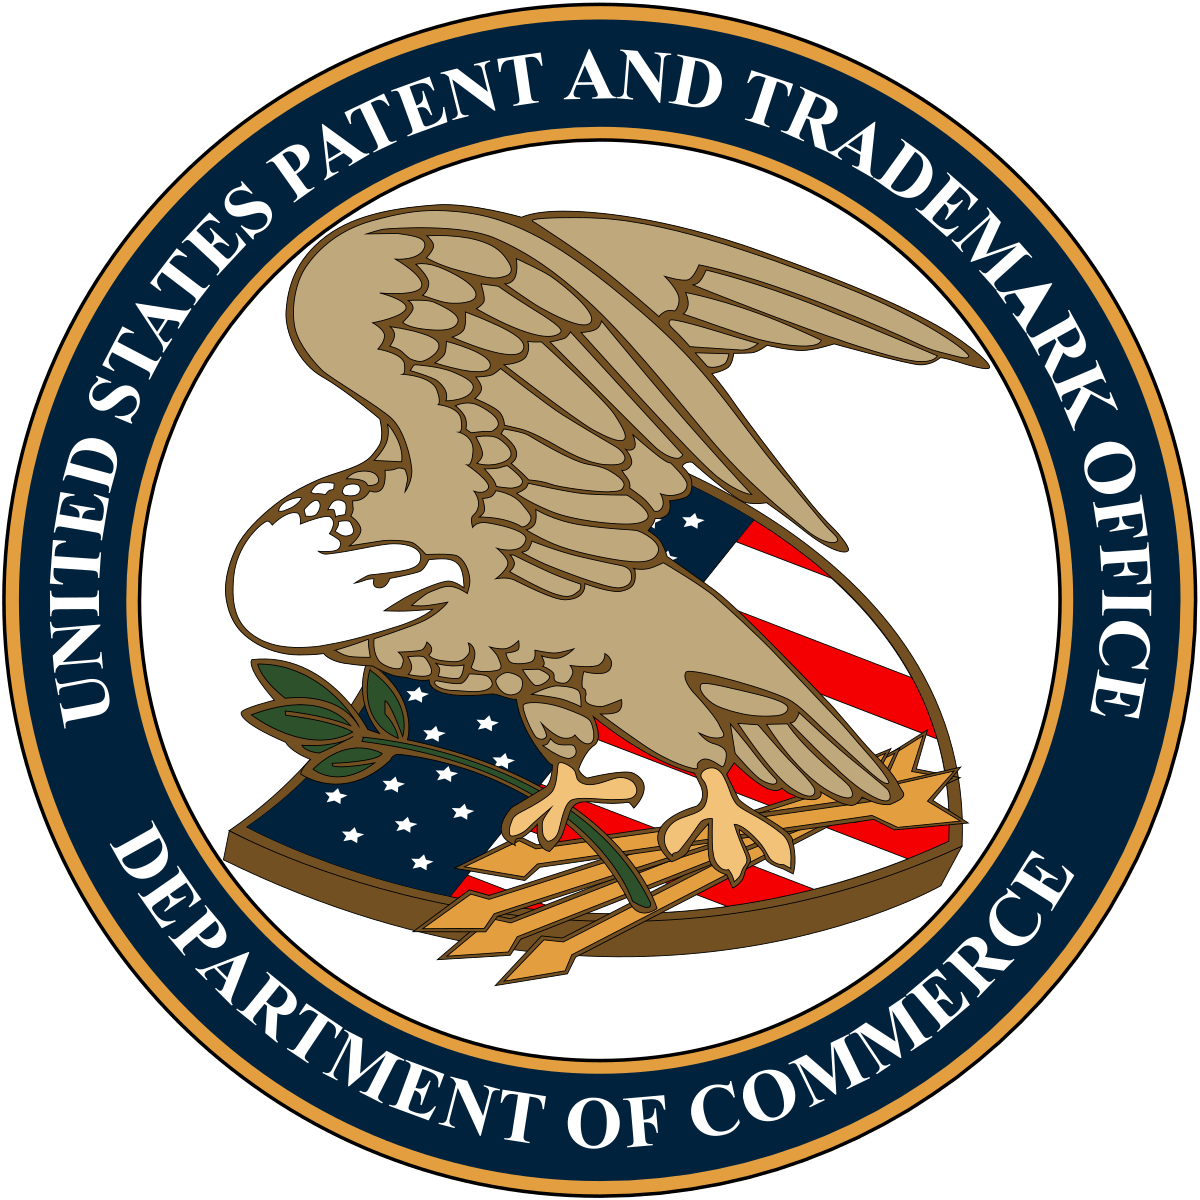 USPTO Logo - United States Patent and Trademark Office